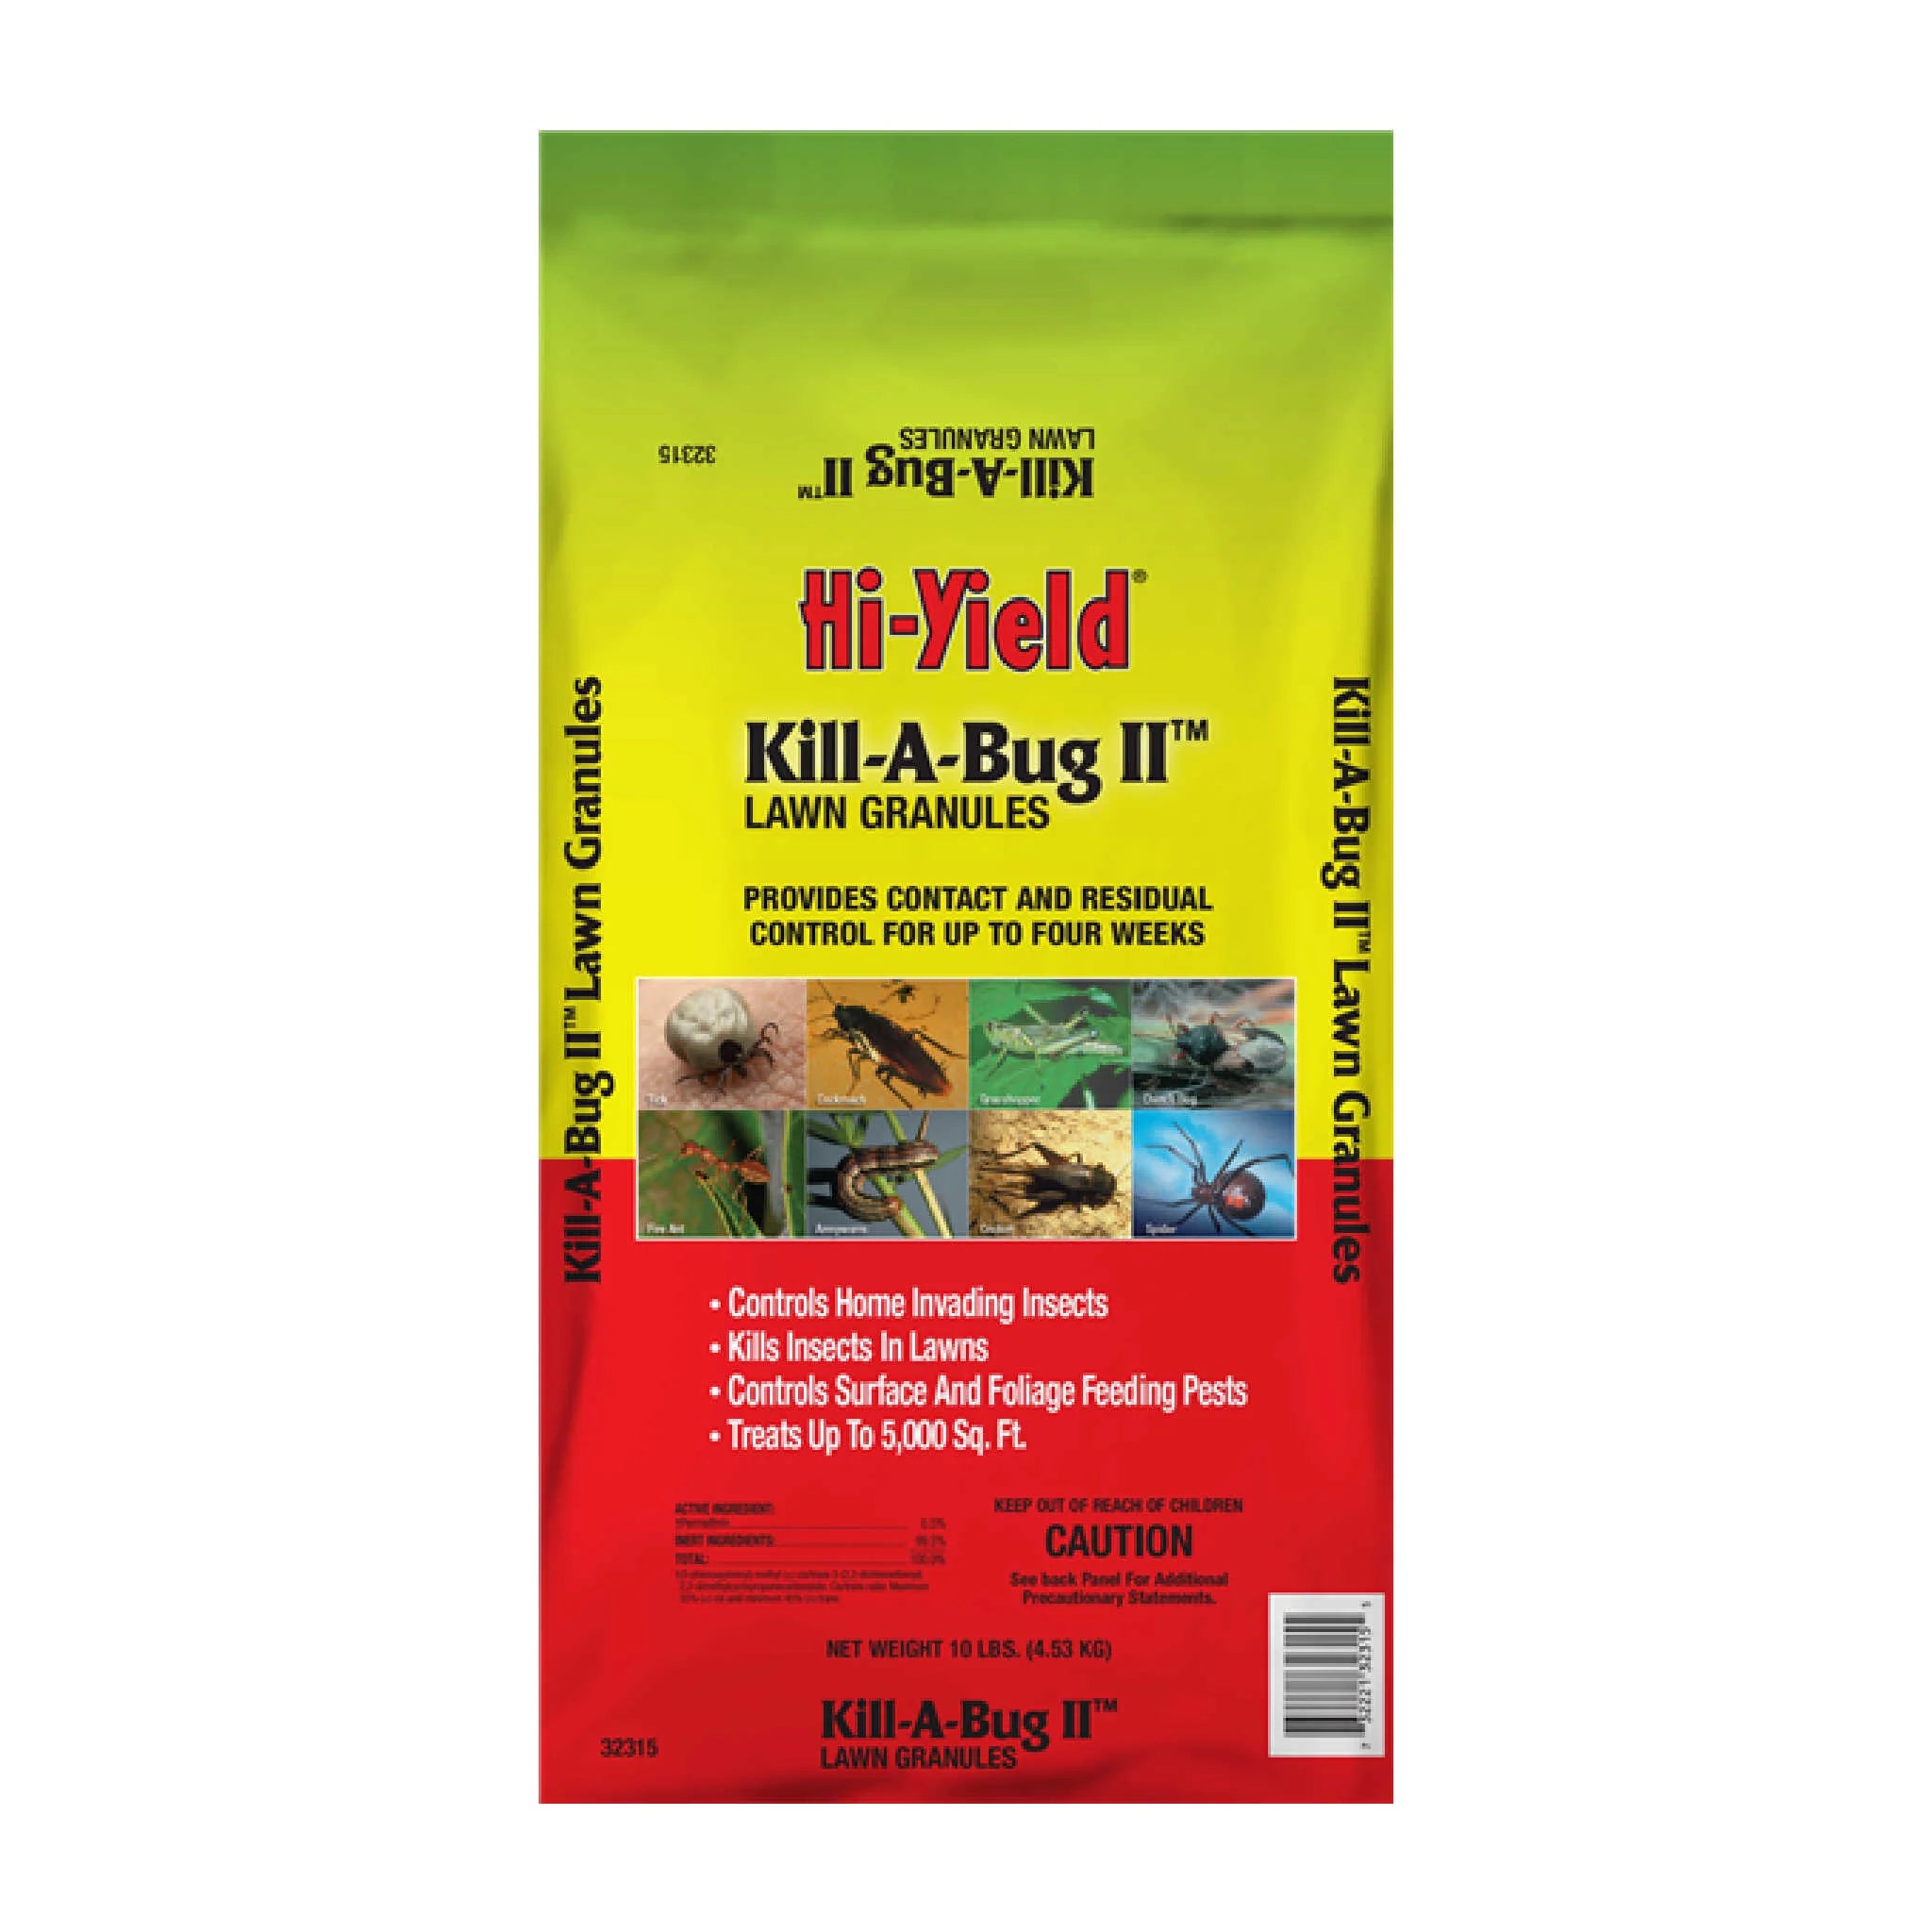 Kill-A-Bug is a granular lawn insecticide for grubs, armyworms and spiders